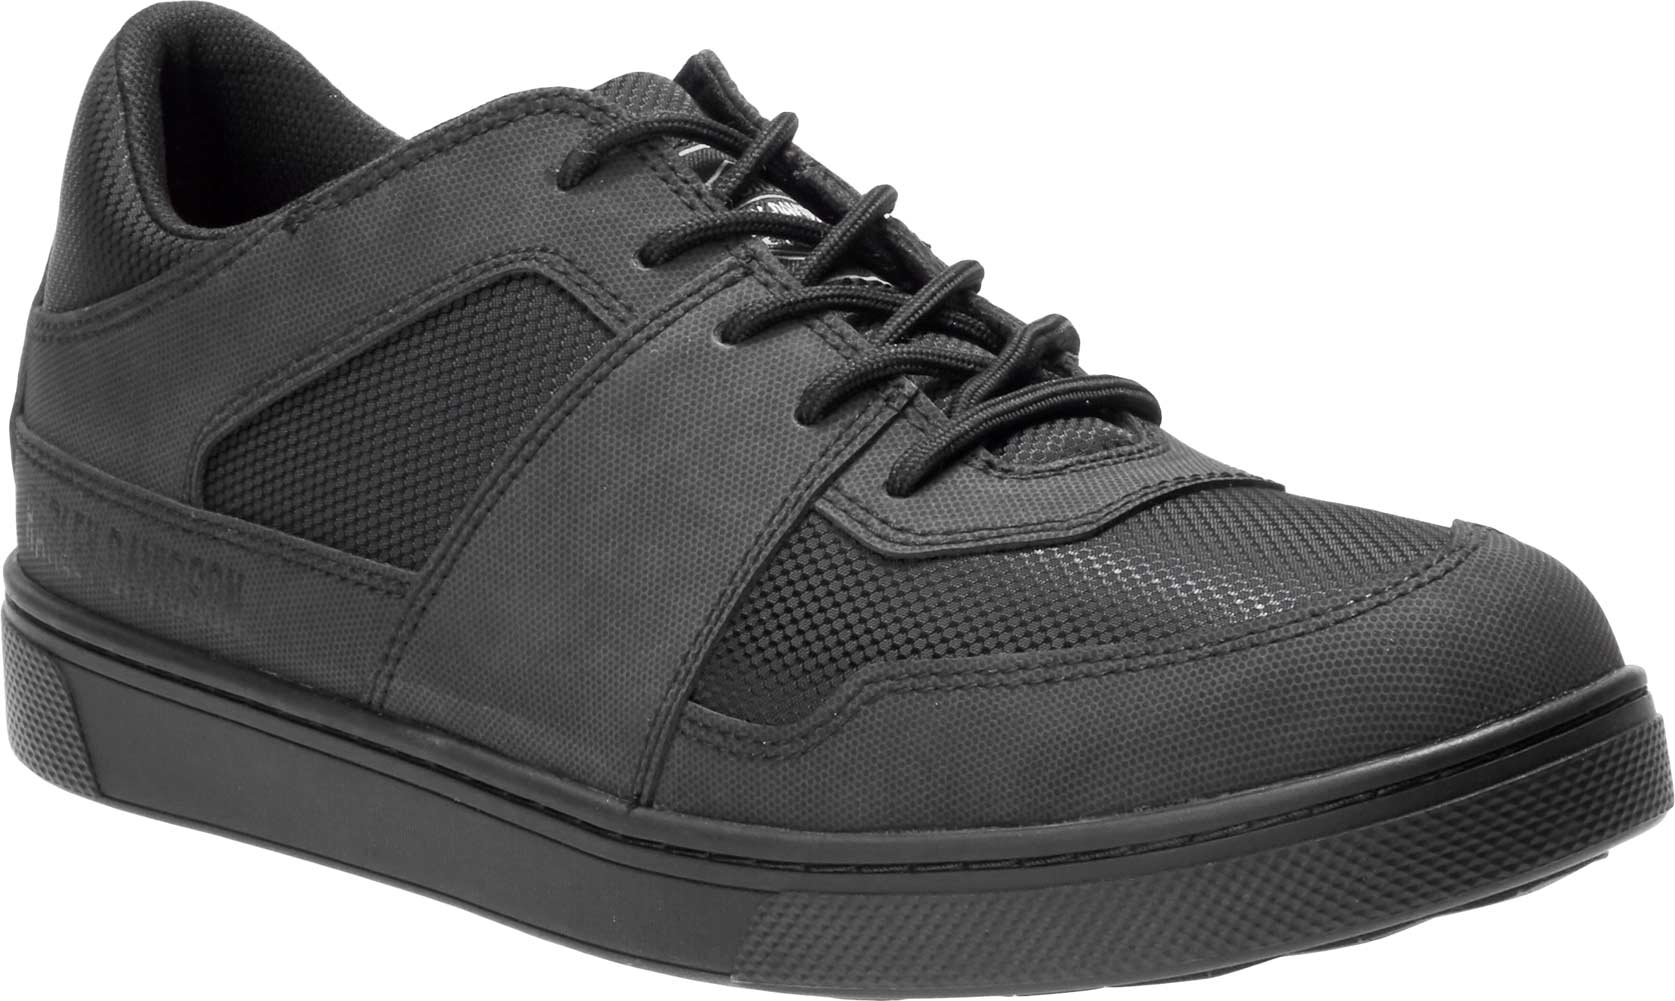 mens black leather athletic shoes